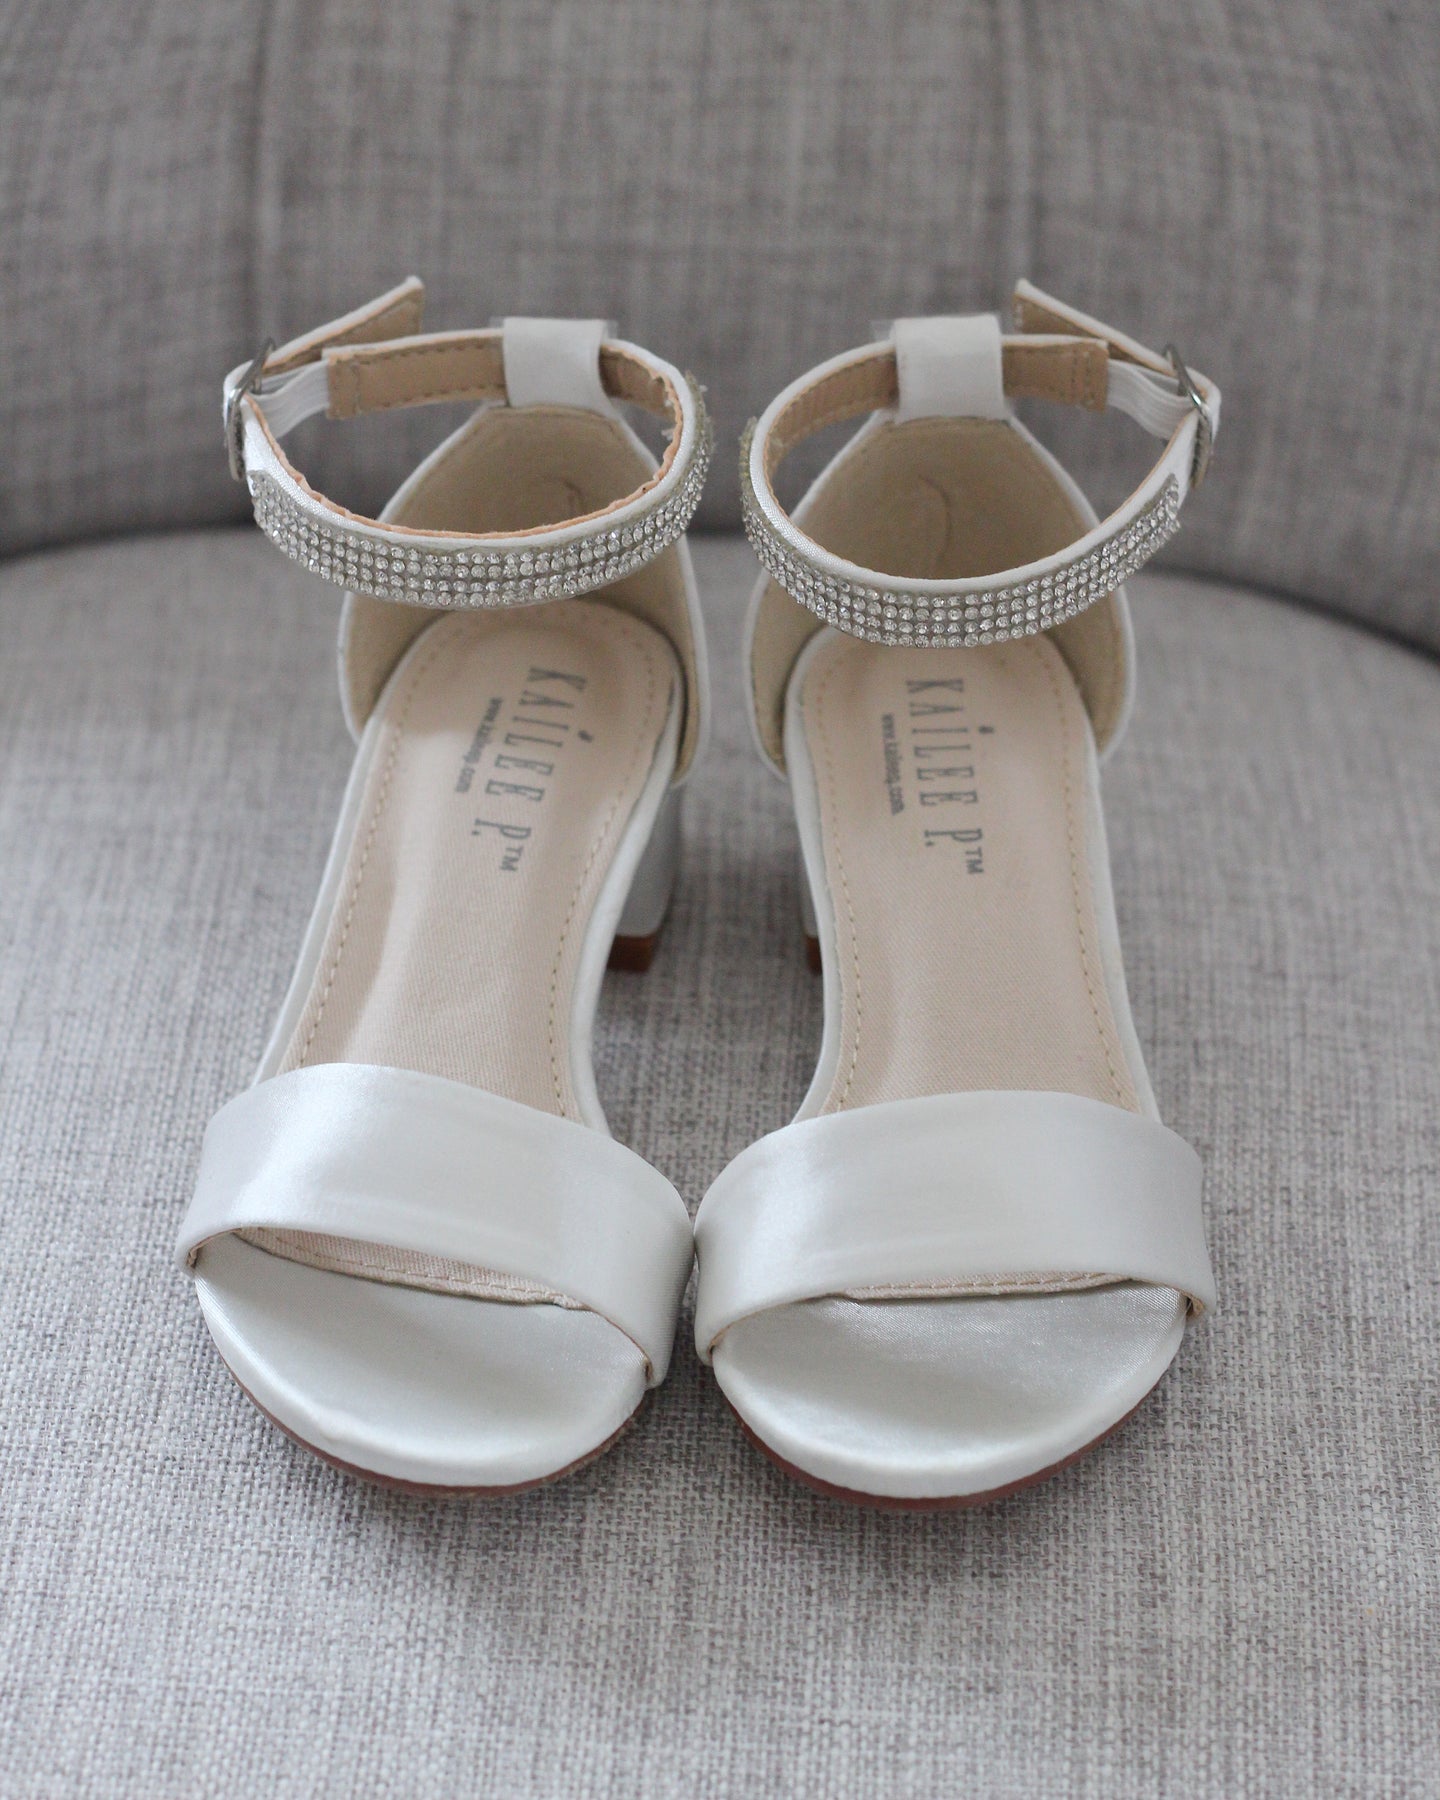 Taylor Off White Ankle Strap Heels | White ankle strap heels, Bride heels,  Wedding shoes heels